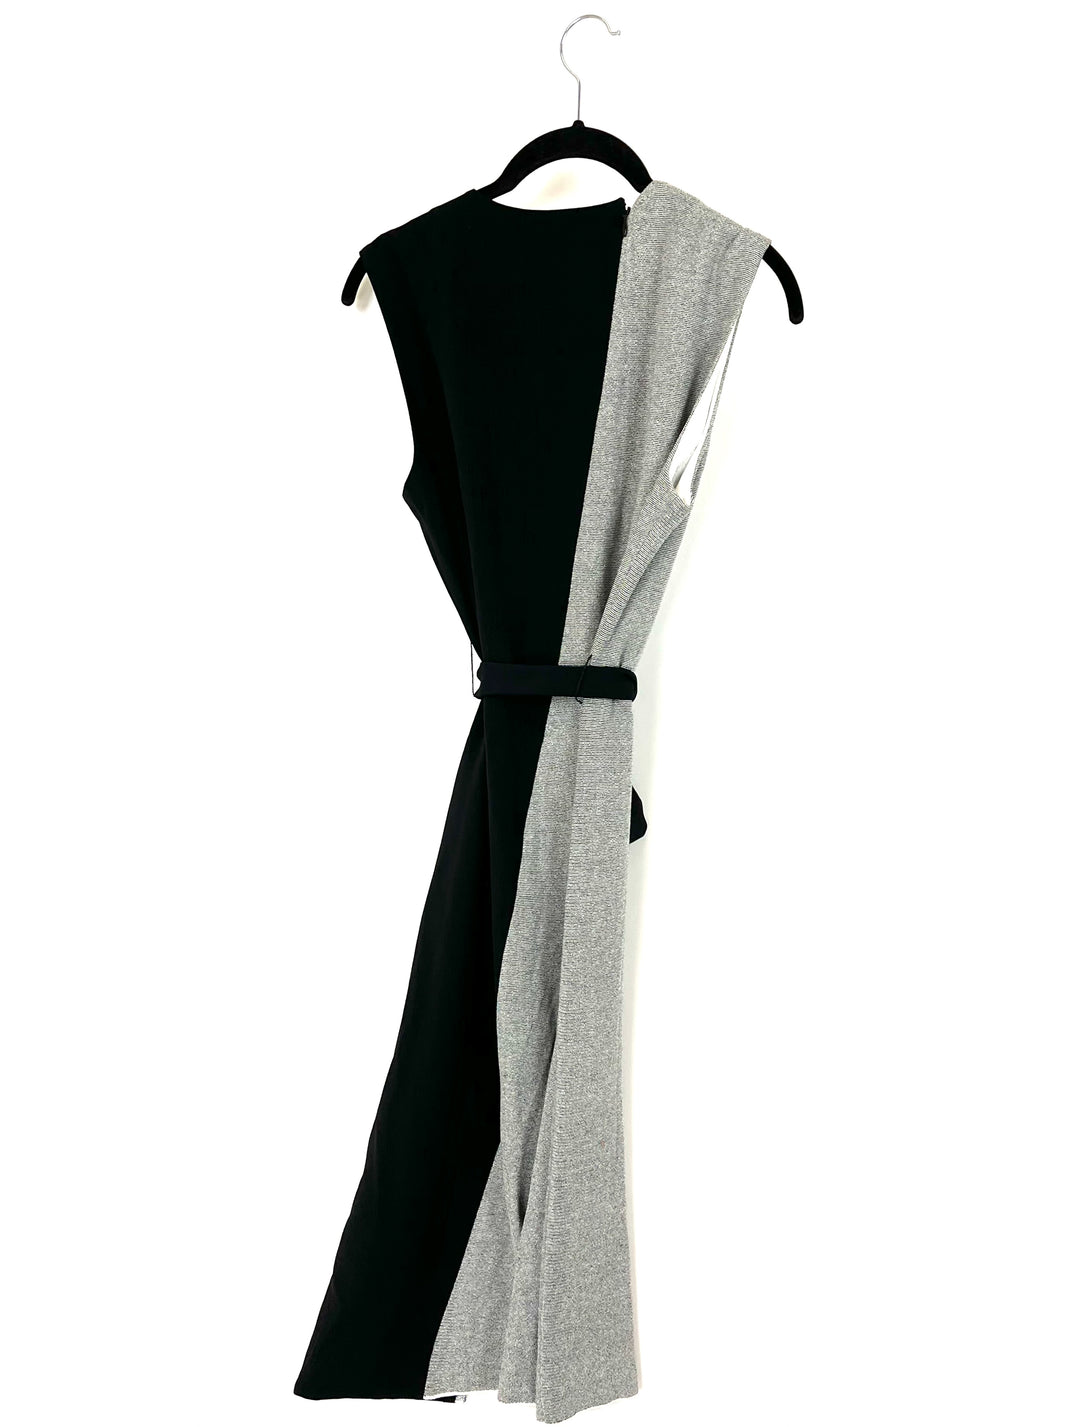 Black And Grey Dress - Size 2-4